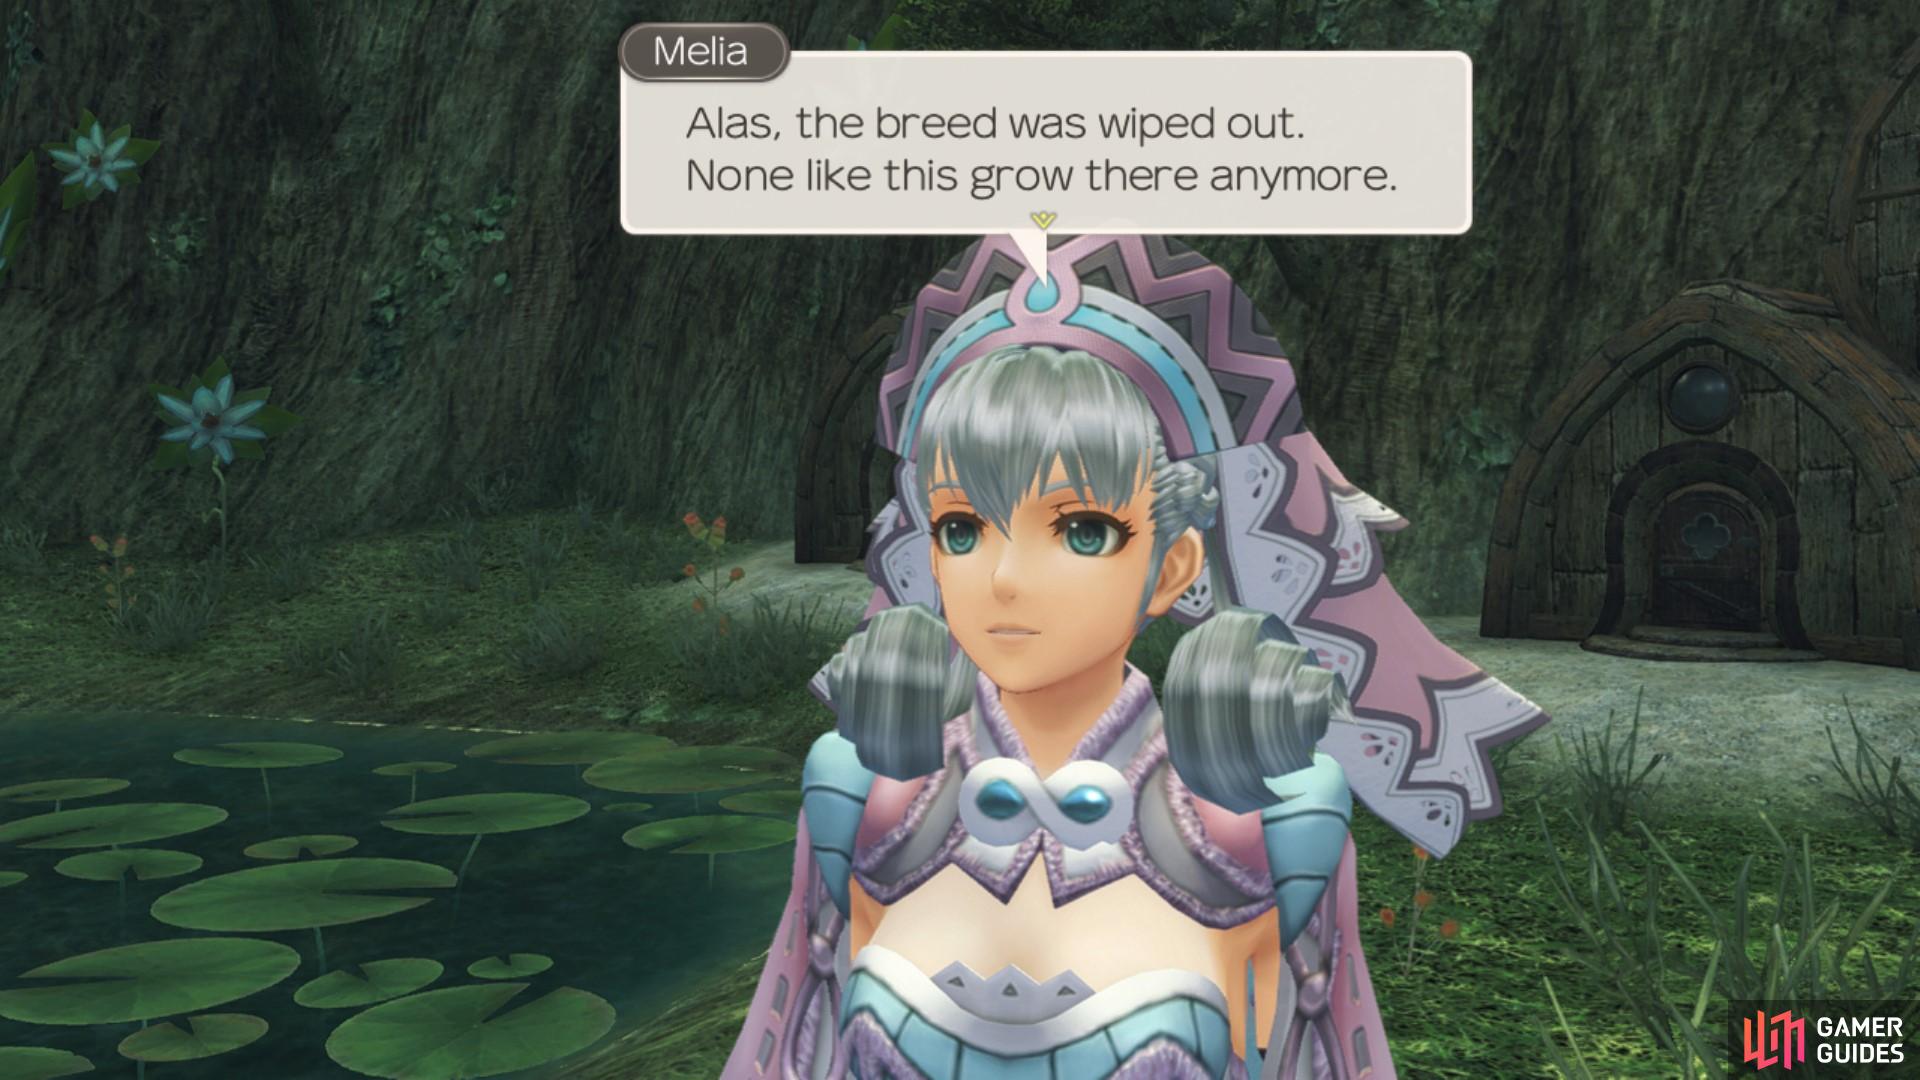 Melia is reminded of her garden.